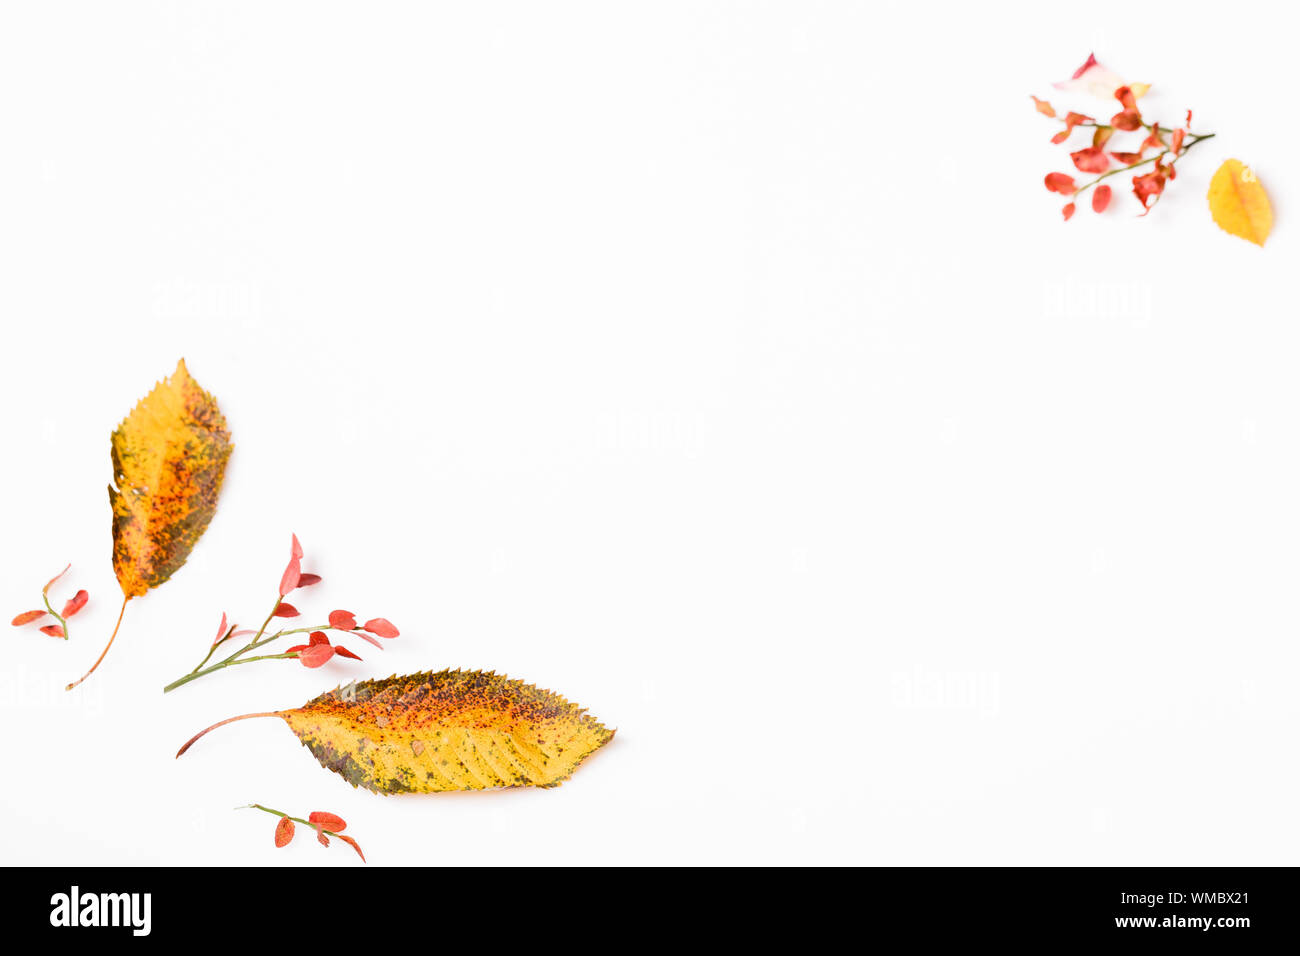 Autumn composition made of autumn dry multi-colored leaves on white background. Autumn, fall concept. Stock Photo